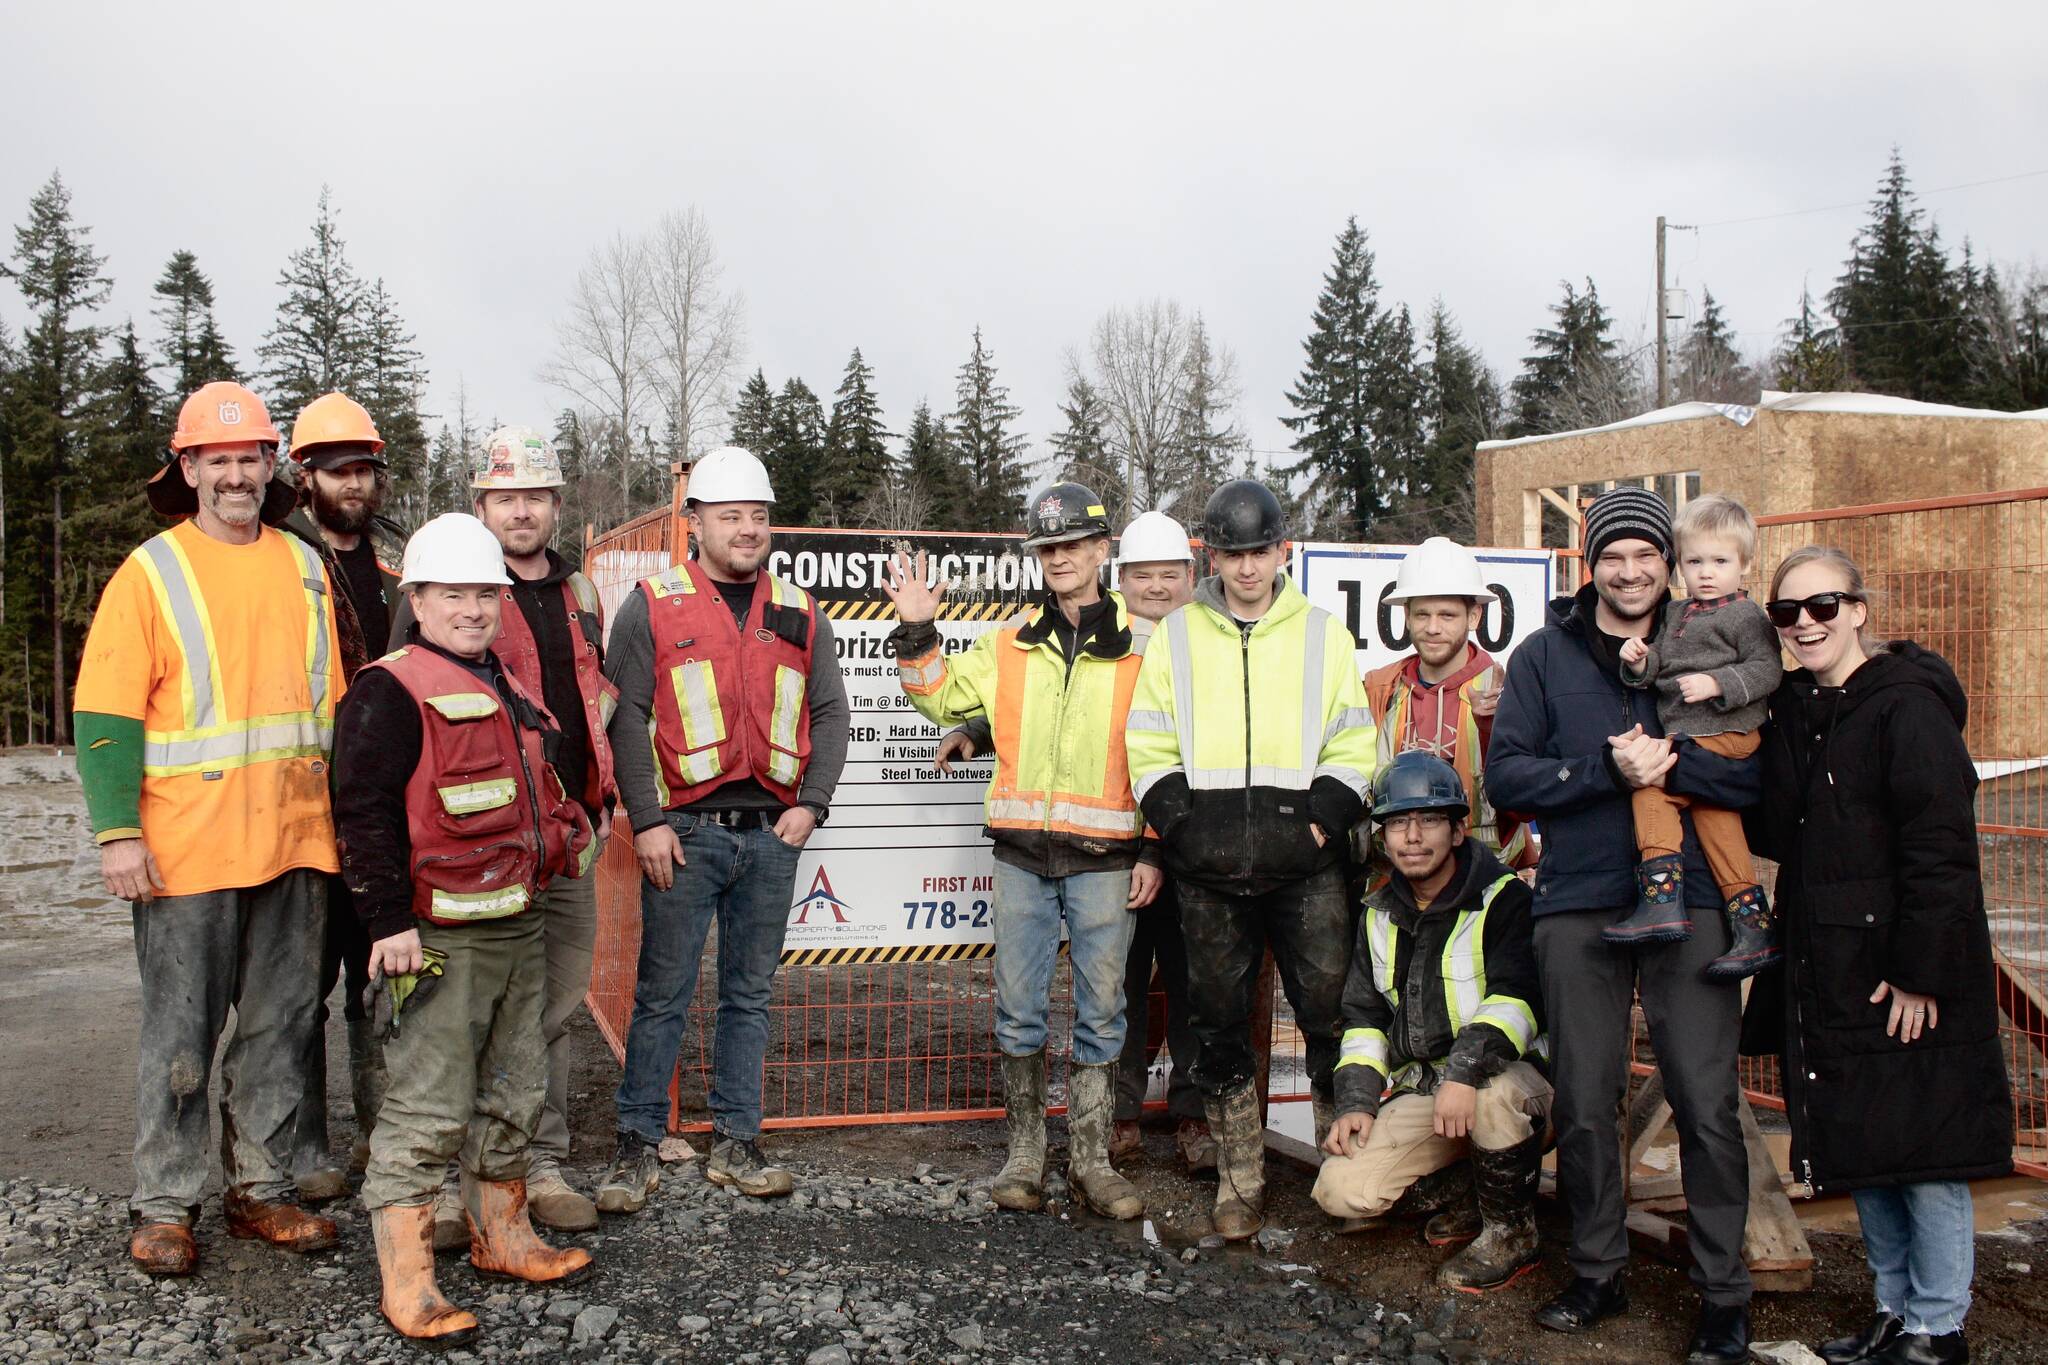 Nicole Hillier (left) reached out on Facebook asking for construction crews who would be interested in singing her son Phil happy birthday. Photo by Marc Kitteringham/Campbell River Mirror